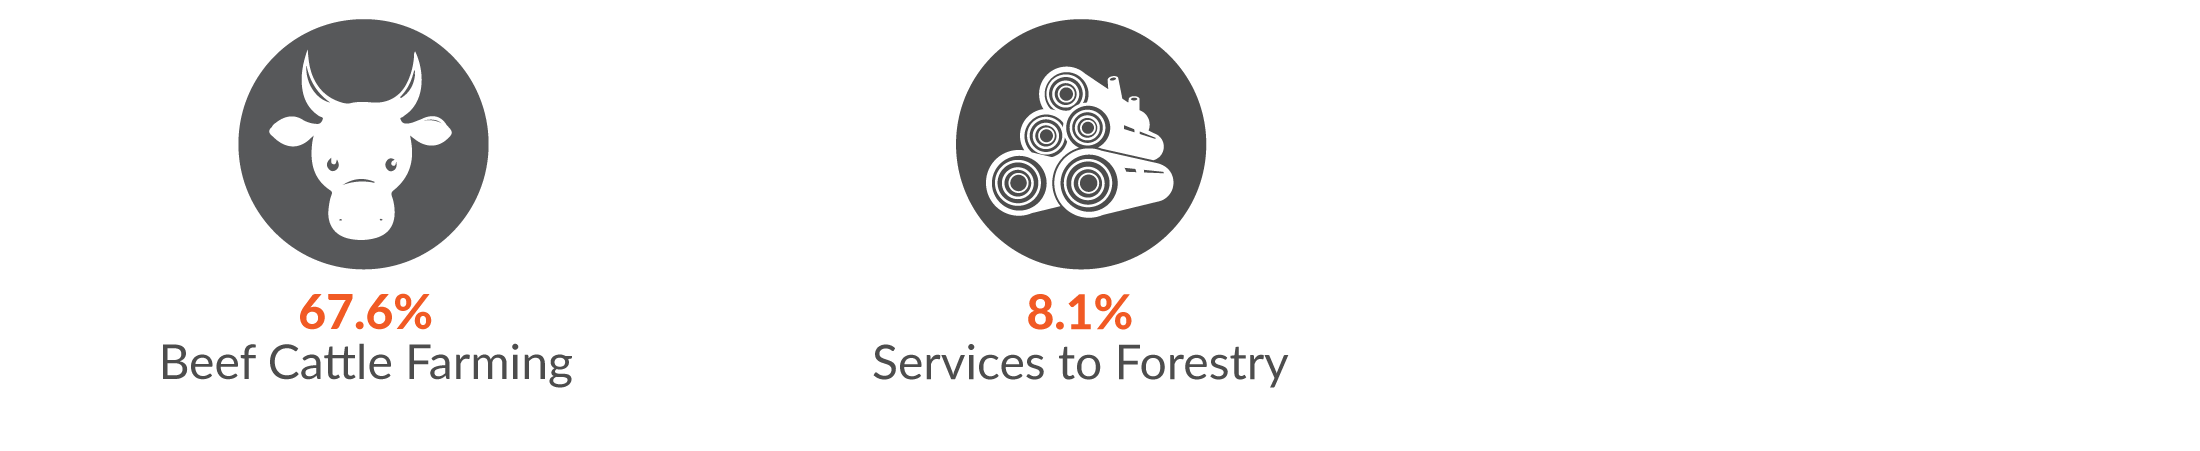 This infographic shows 67.6% of Agriculture, forestry and fishing serious injury claims were in Beef Cattle Farming and 8.1% in Services to Forestry.